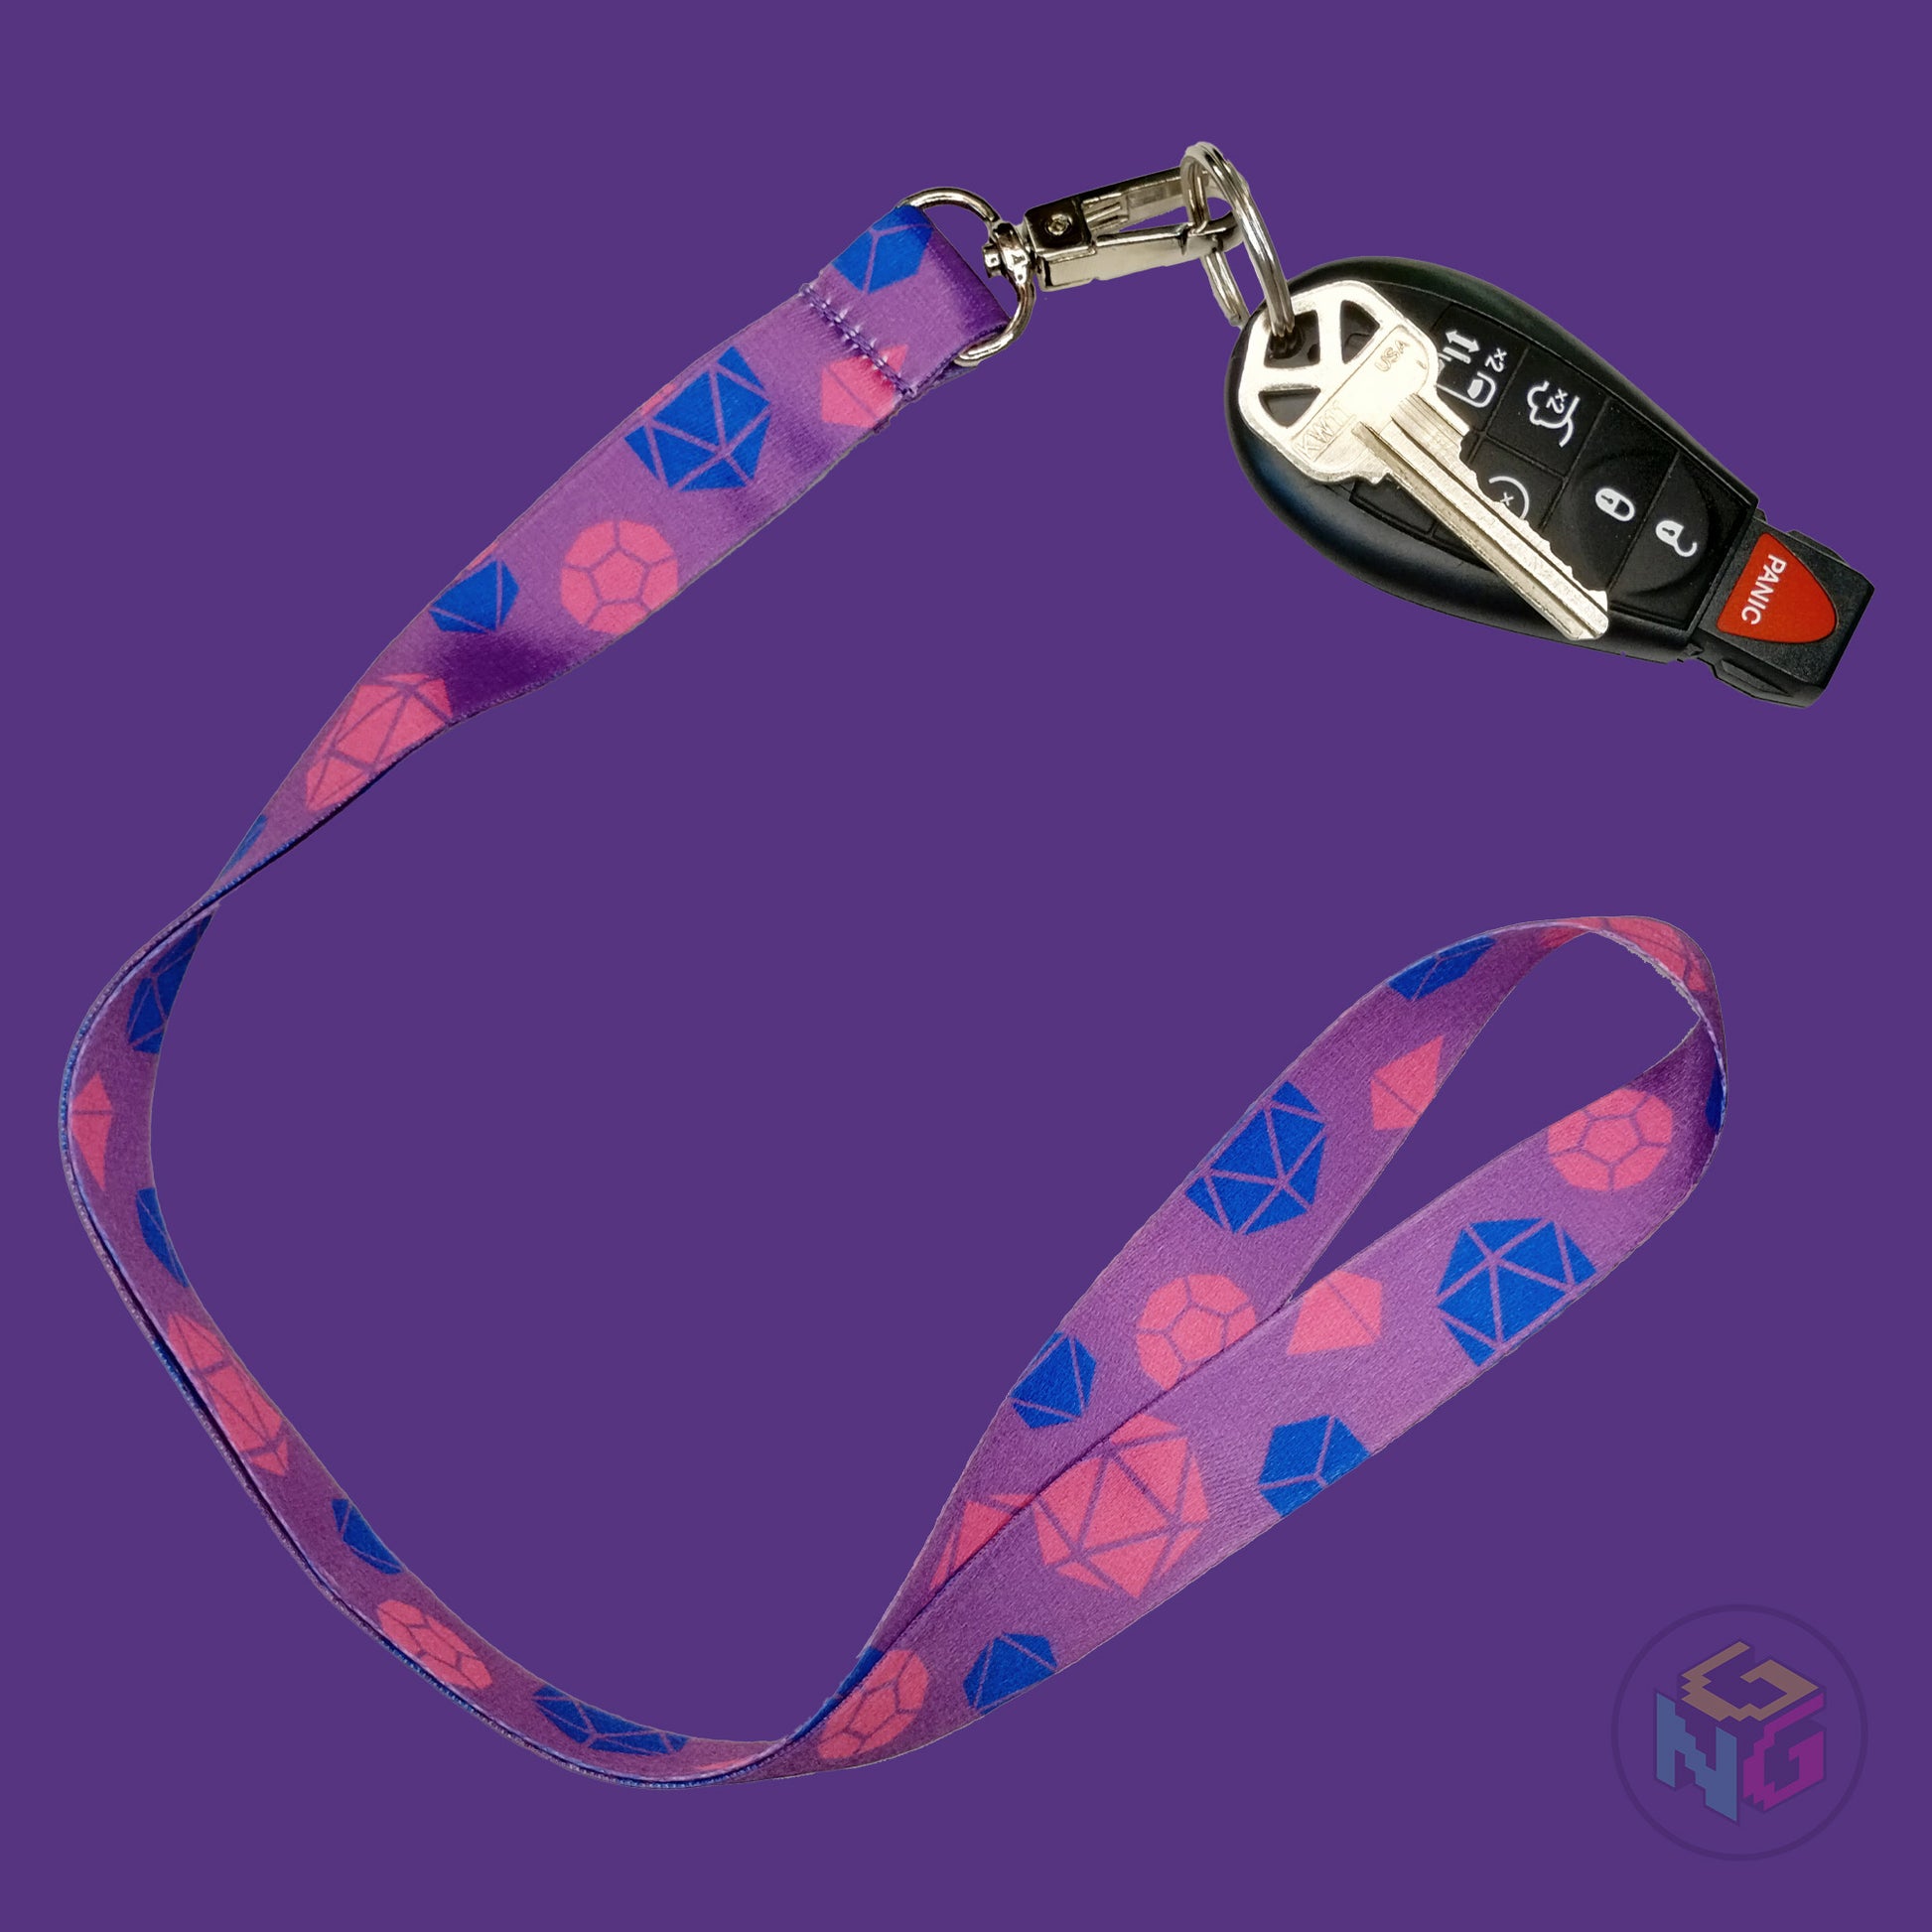 purple dnd bisexual lanyard showing the pink and blue tabletop dice with a key fob clipped to the end of the lanyard